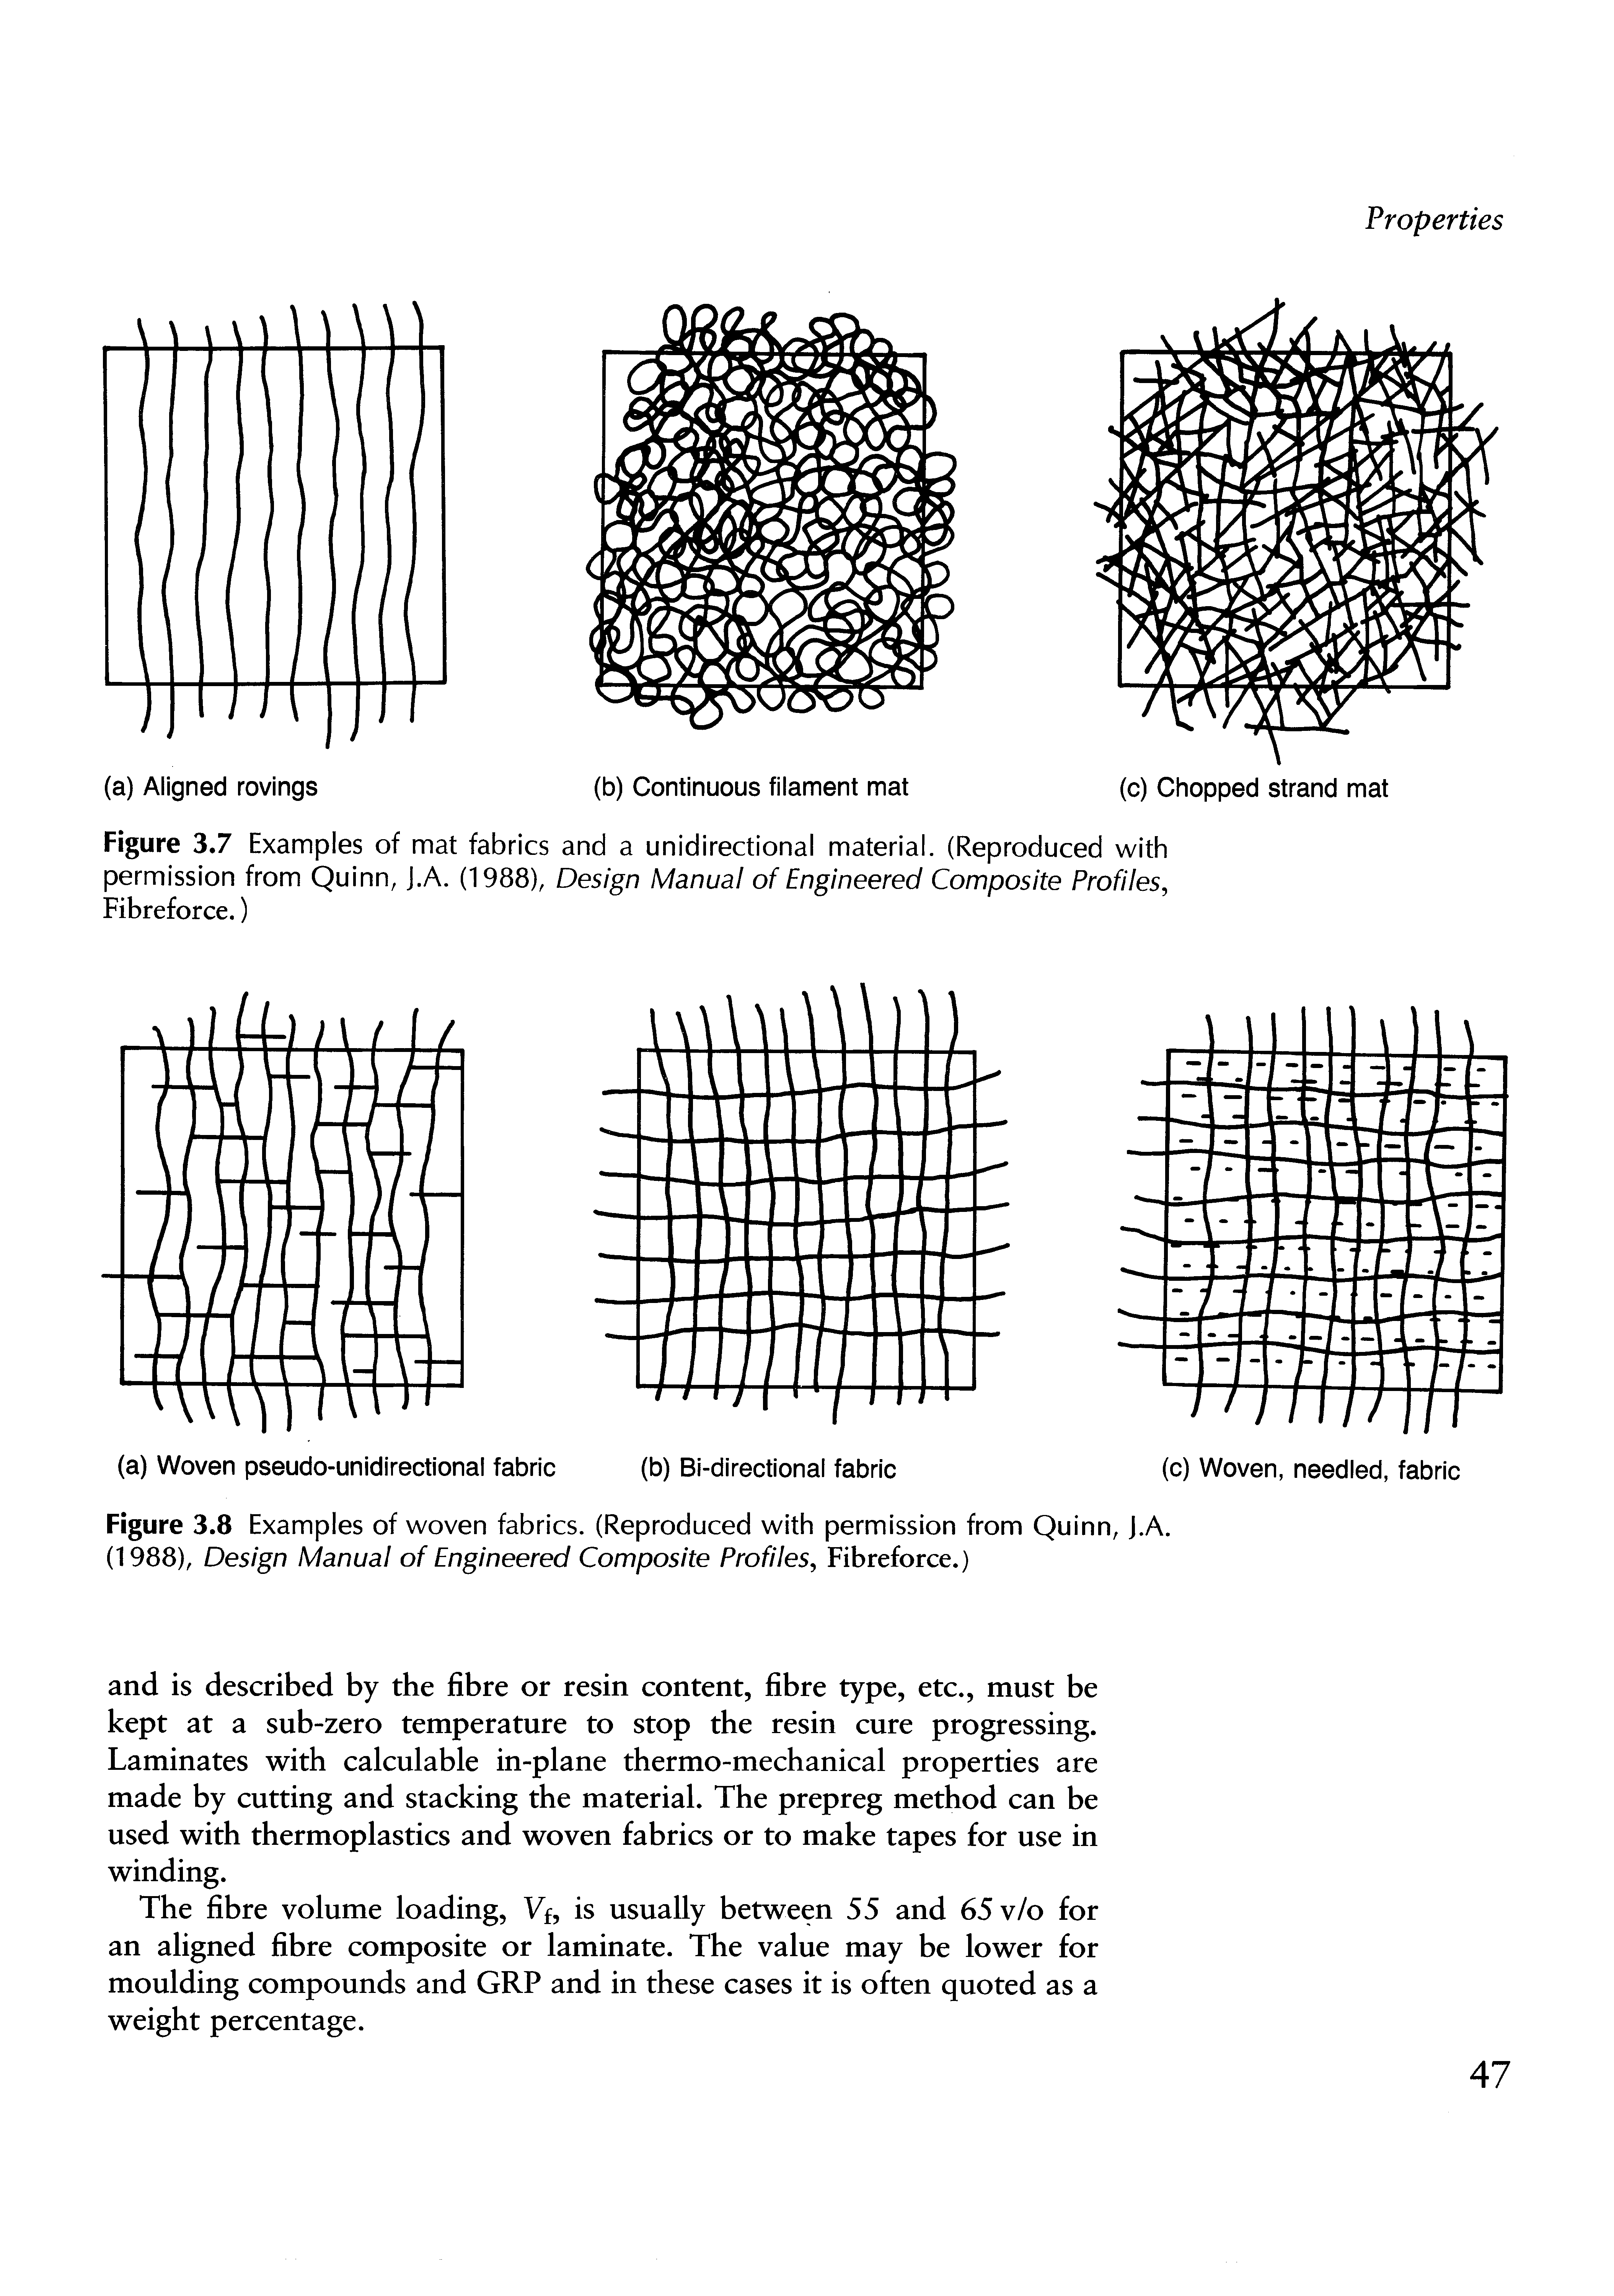 Figure 3.7 Examples of mat fabrics and a unidirectional material. (Reproduced with permission from Quinn, J.A. (1988), Design Manual of Engineered Composite Profiles, Fibreforce.)...